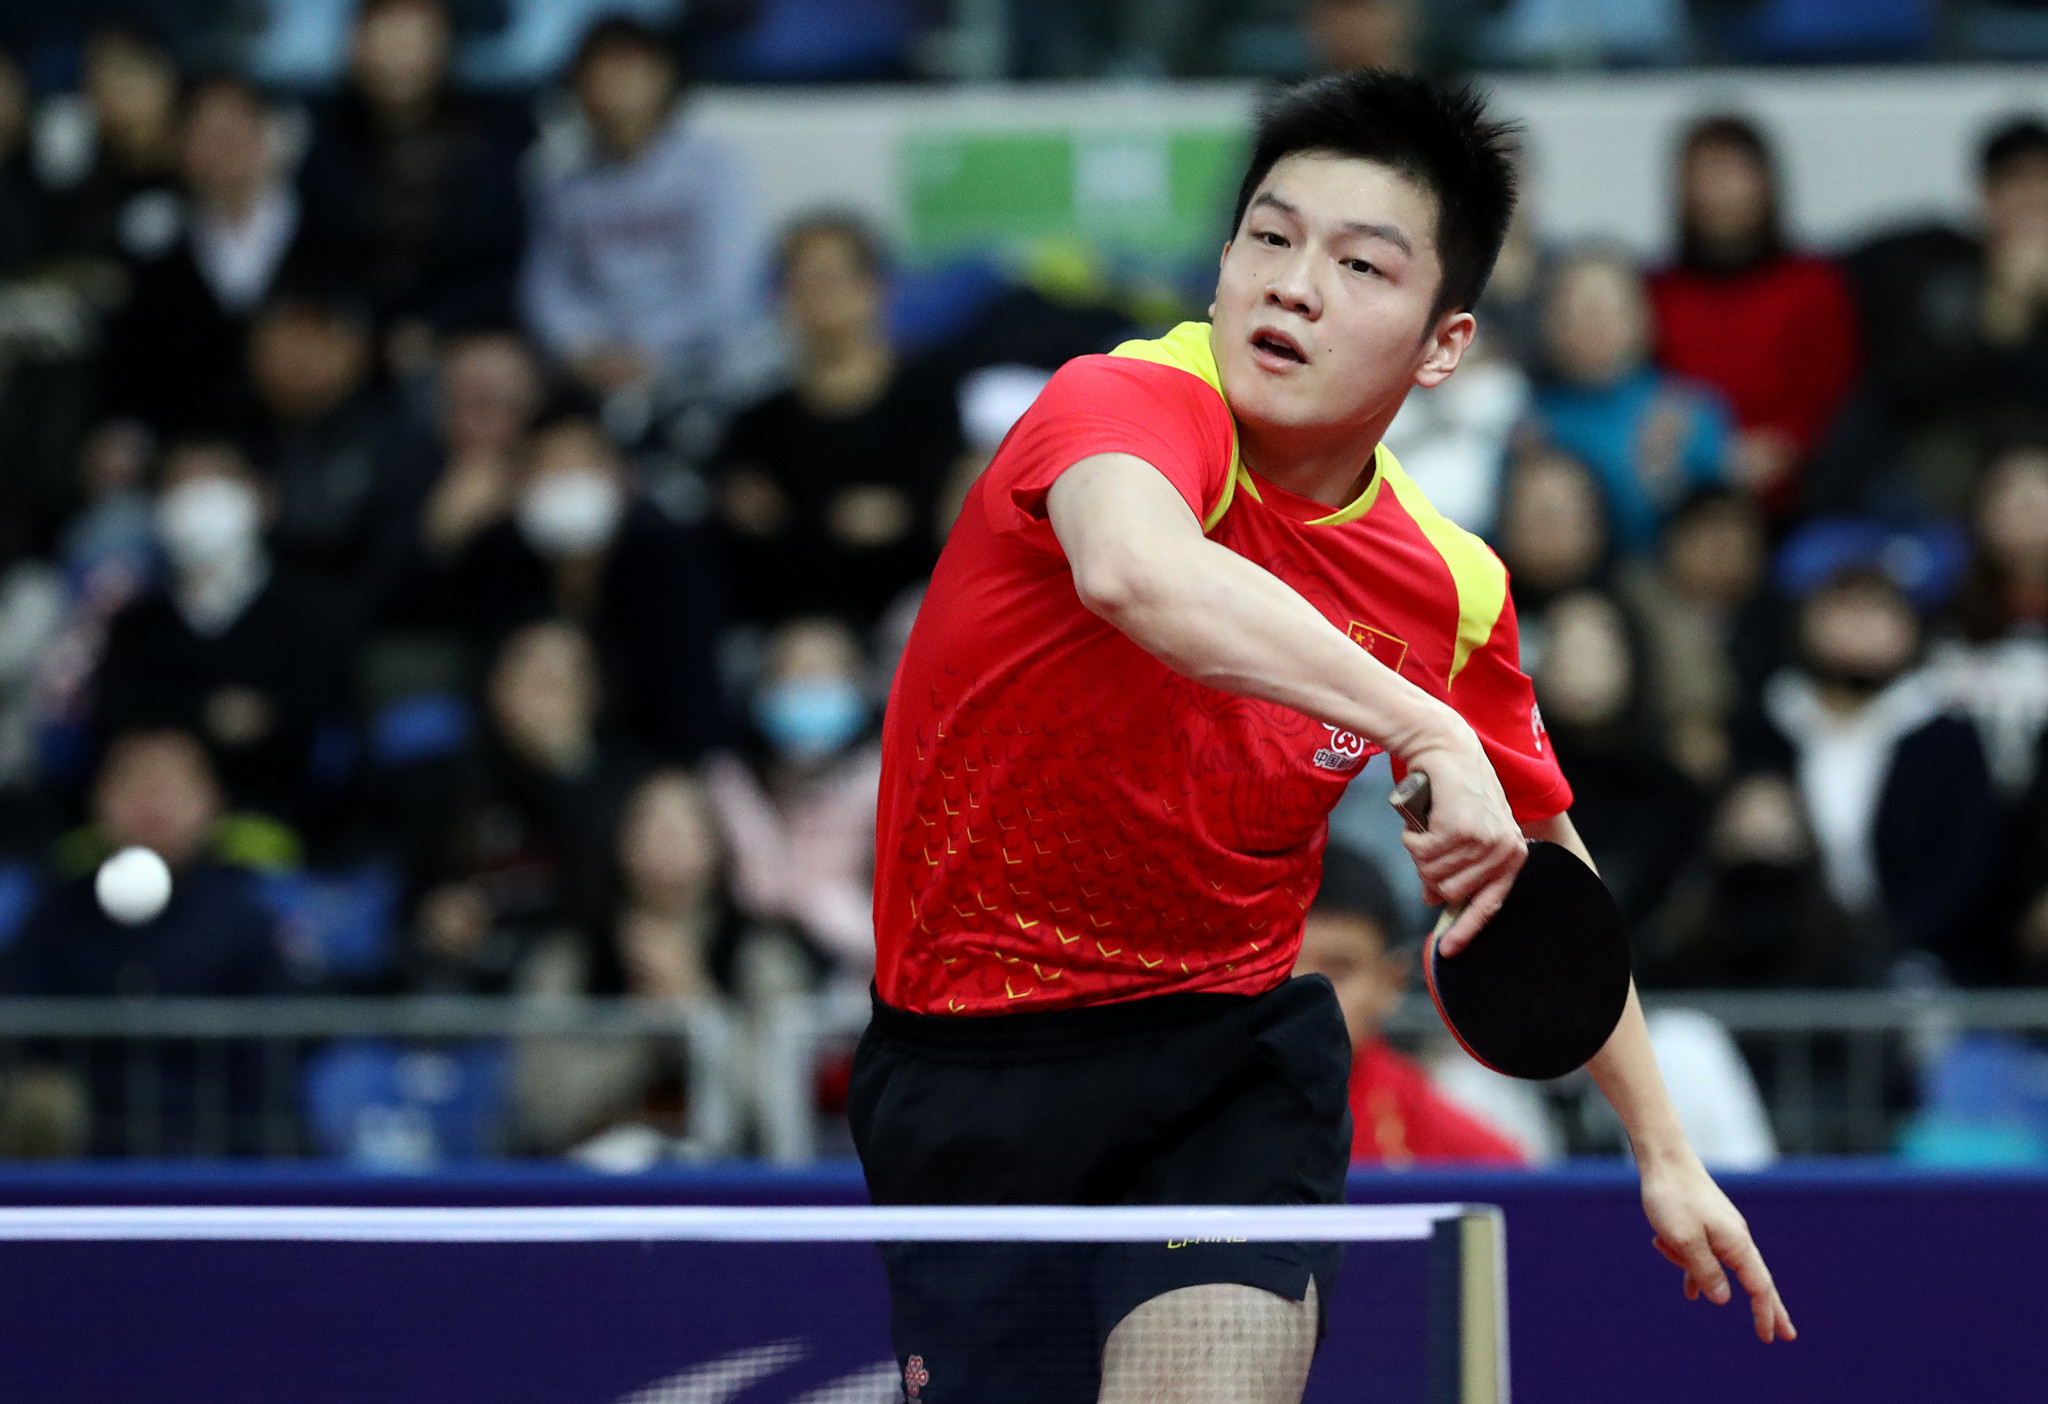 Fan Zhendong is one match away from defending his men's singles title ©Getty Images